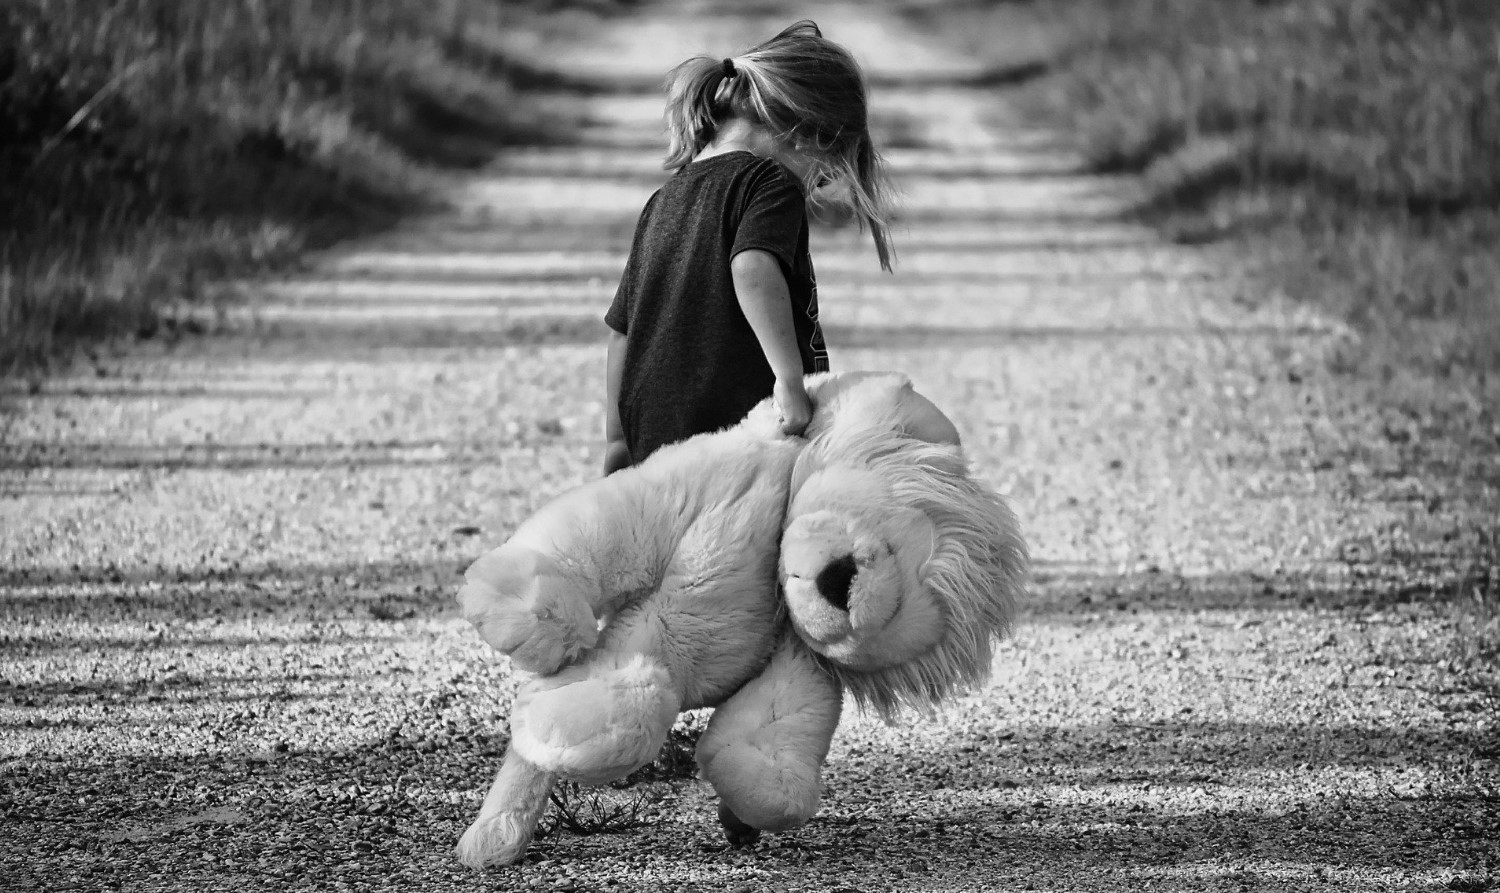 Black and white image of small girl walking on road with large teddy bear